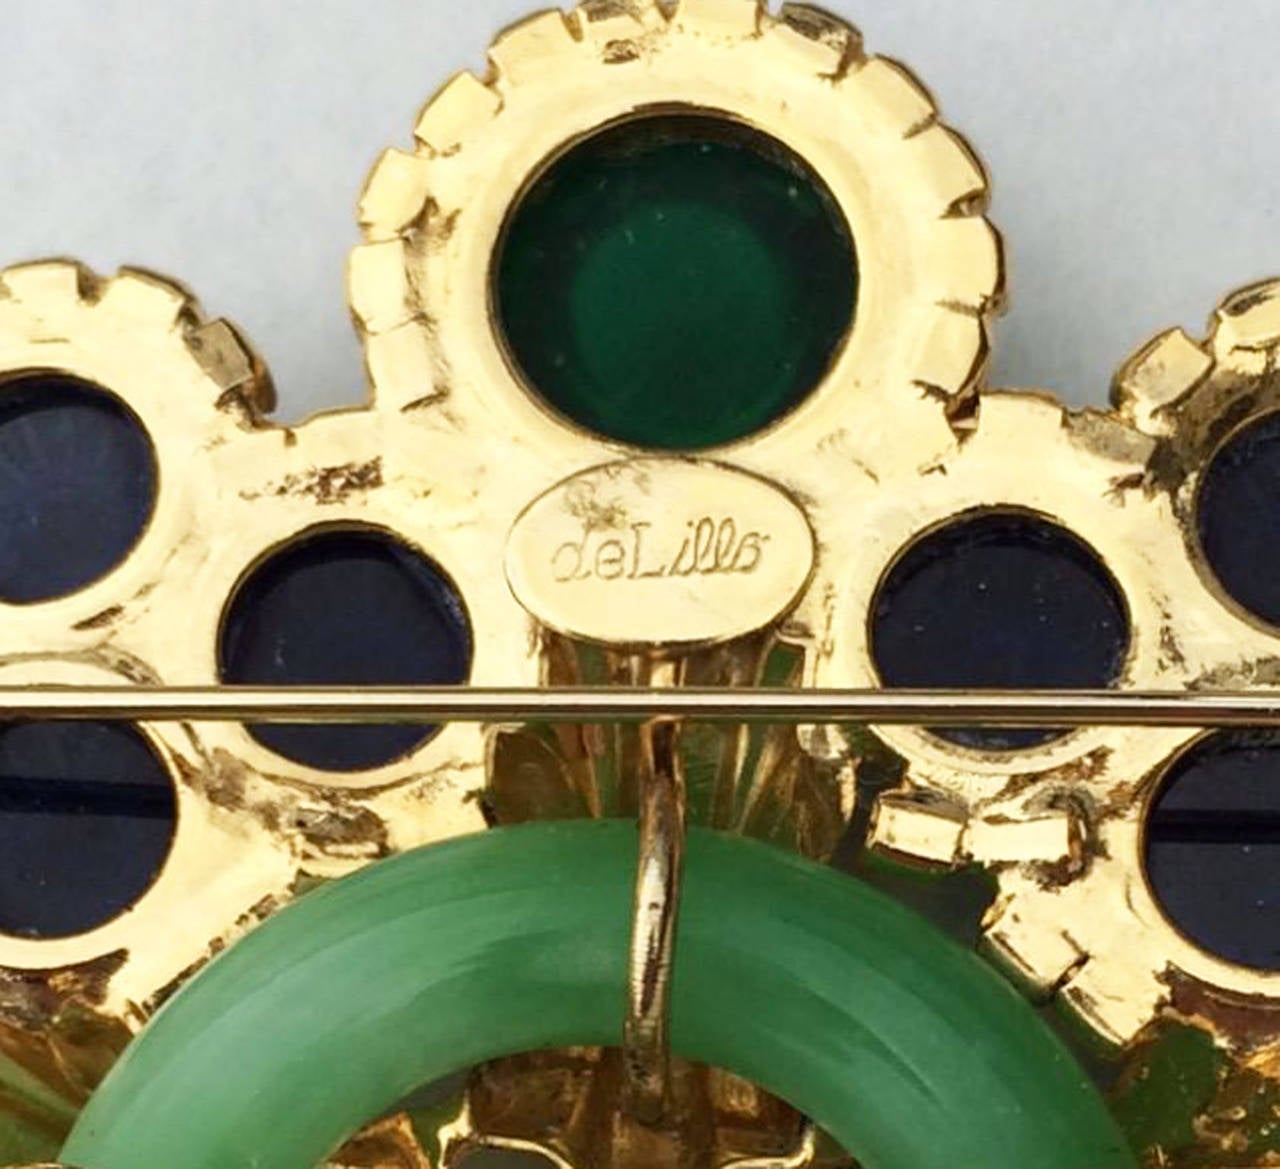 A fine and rare vintage Robert F. Clark for William de Lillo Art Deco revival brooch. Signed gilt metal item features a glass 